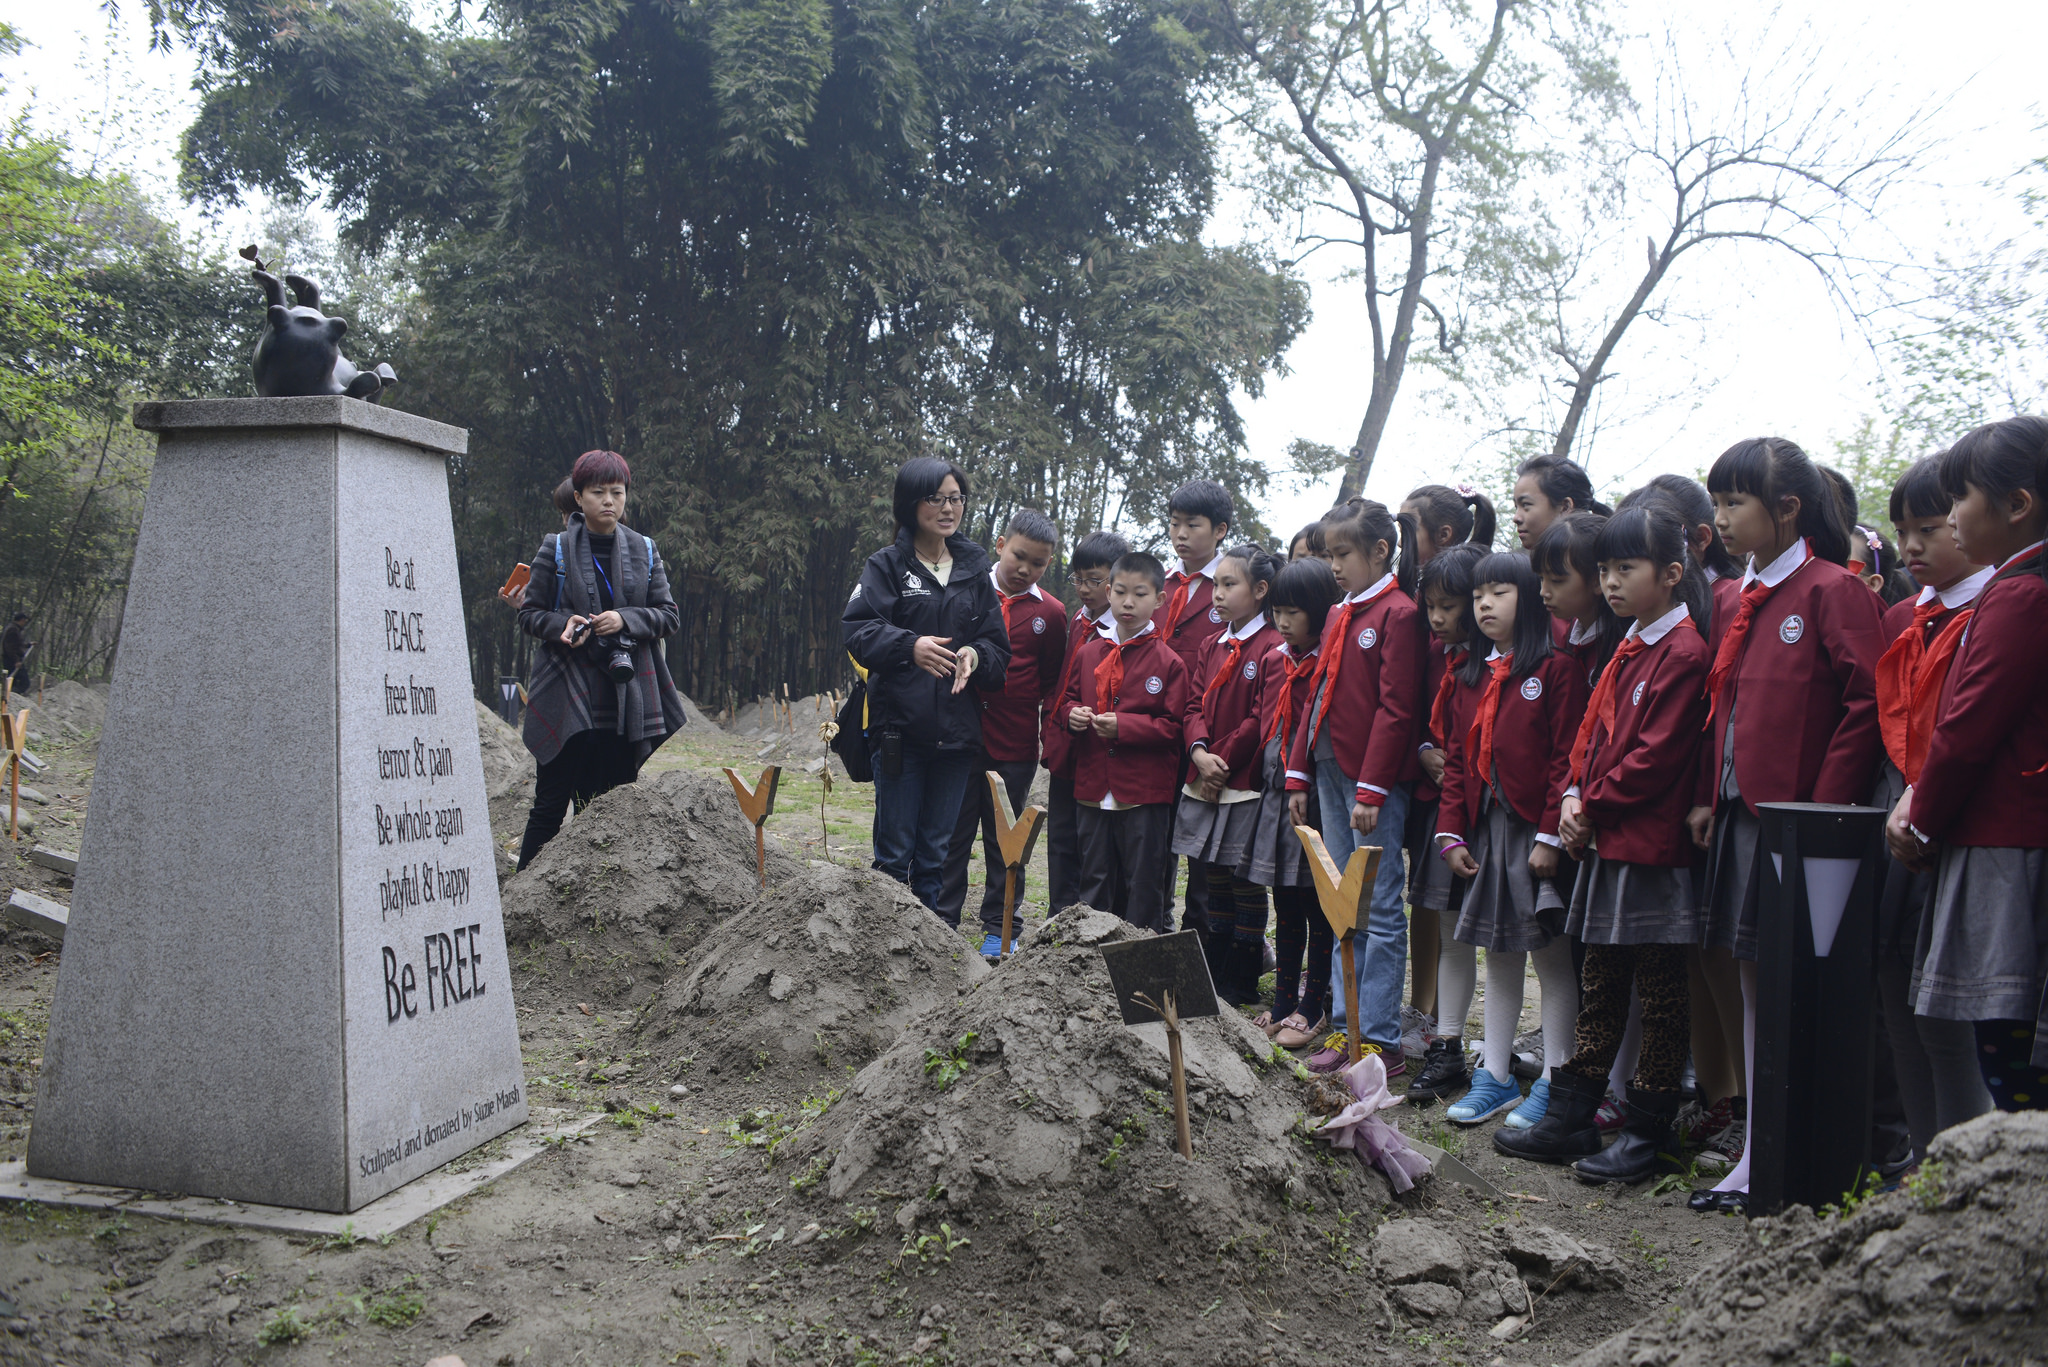 On Tomb Sweeping Day, a traditional Chinese holiday, schoolchildren pay their respects to deceased bears formerly farmed for bile, at Animals Asia's bear sanctuary in Chengdu (photo credit: Animals Asia, used under CC BY-NC 2.0)